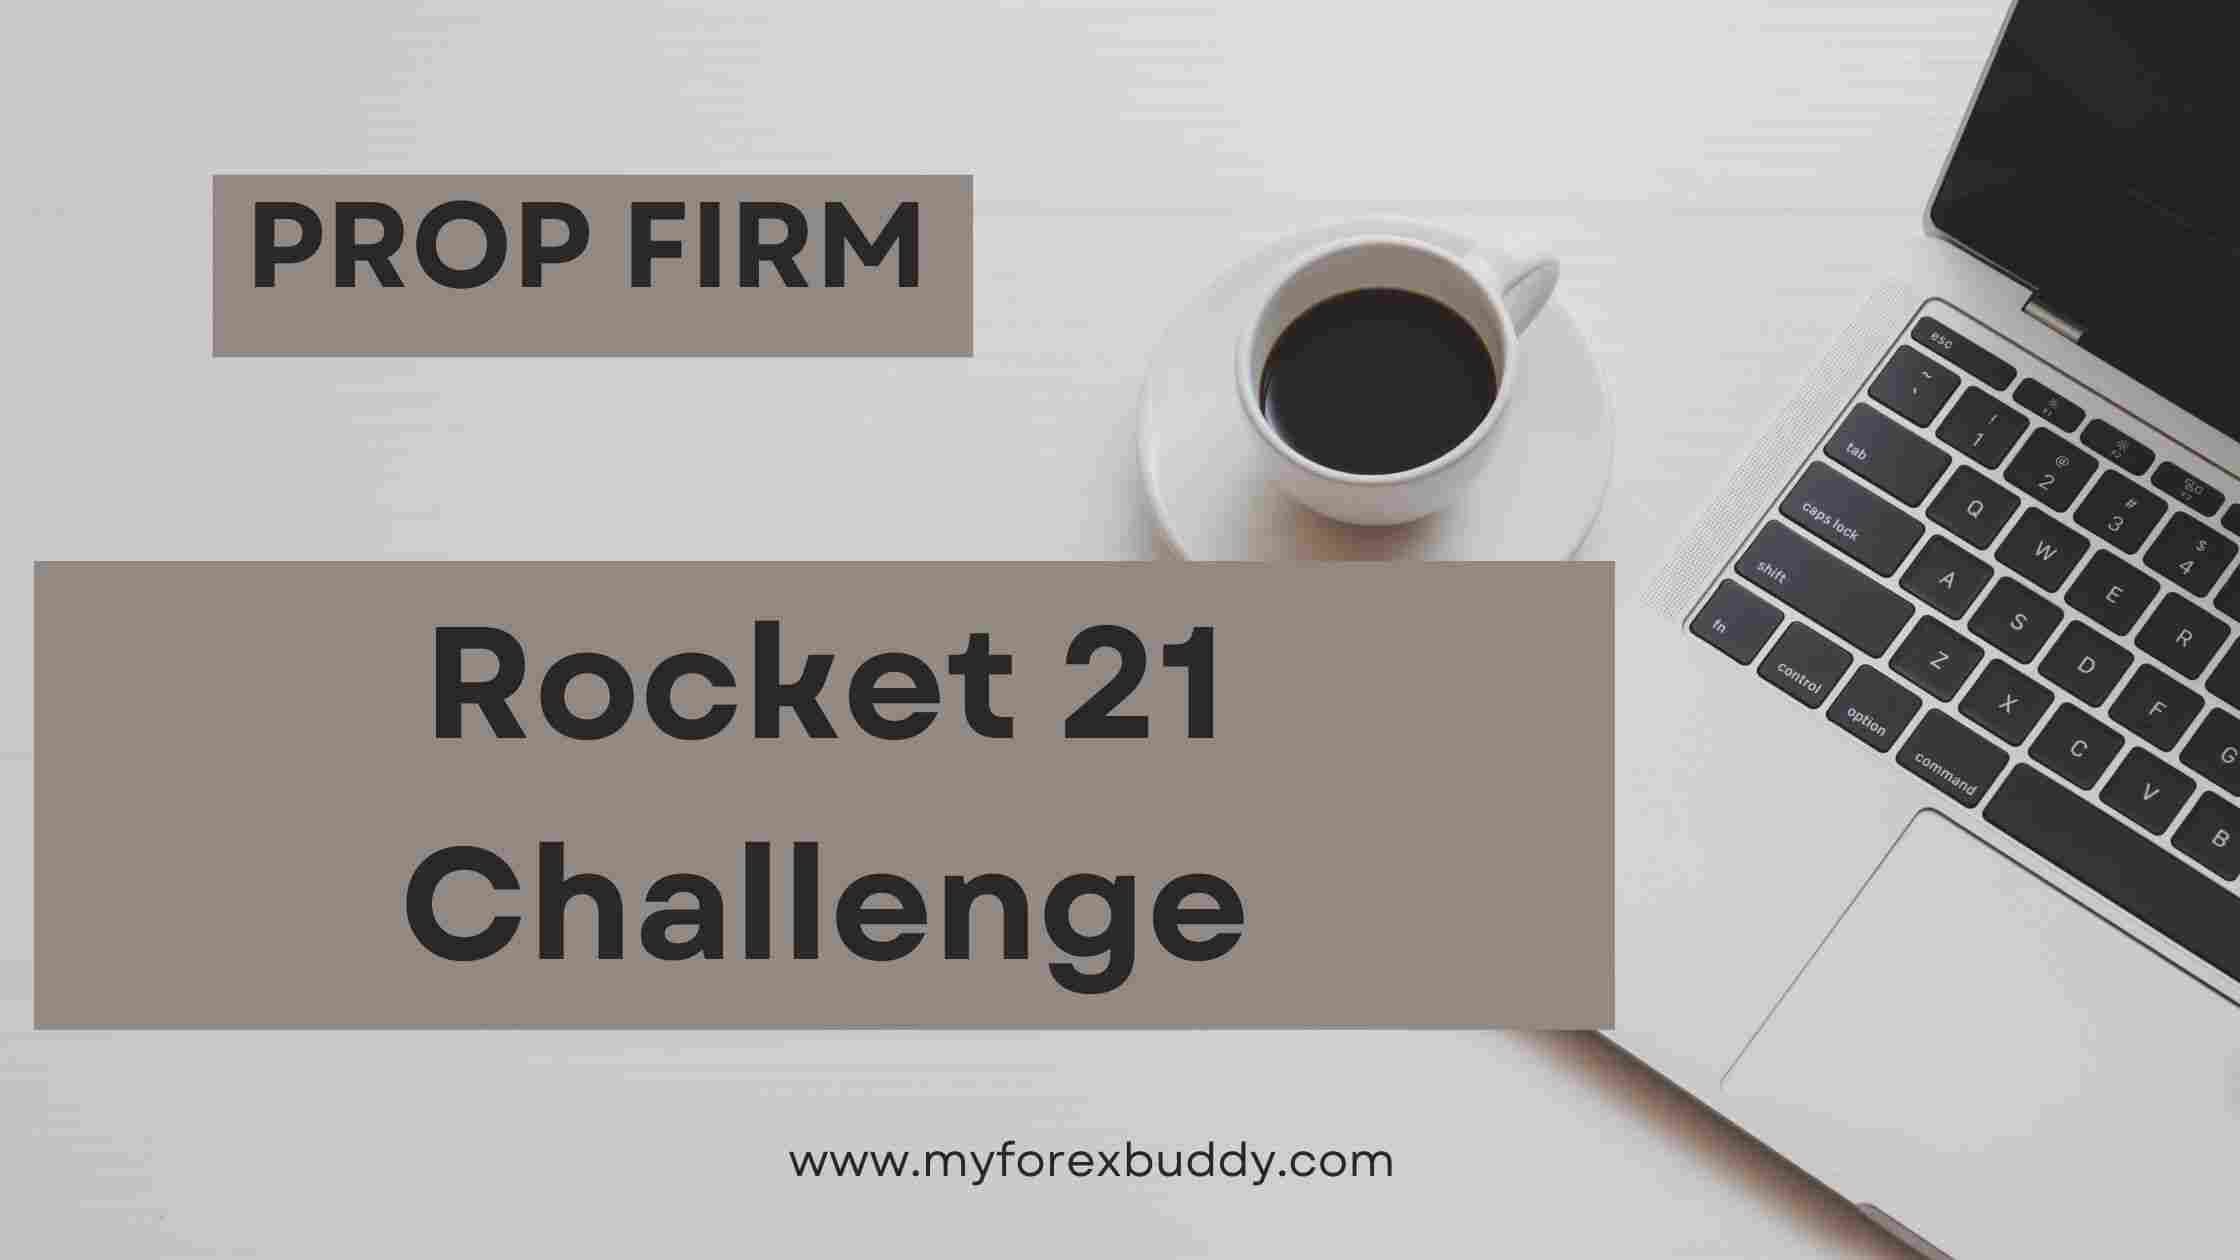 Rocket 21 Challenge Prop Firm Review: Prop Firm with Lowest Spread and best Trading Condition